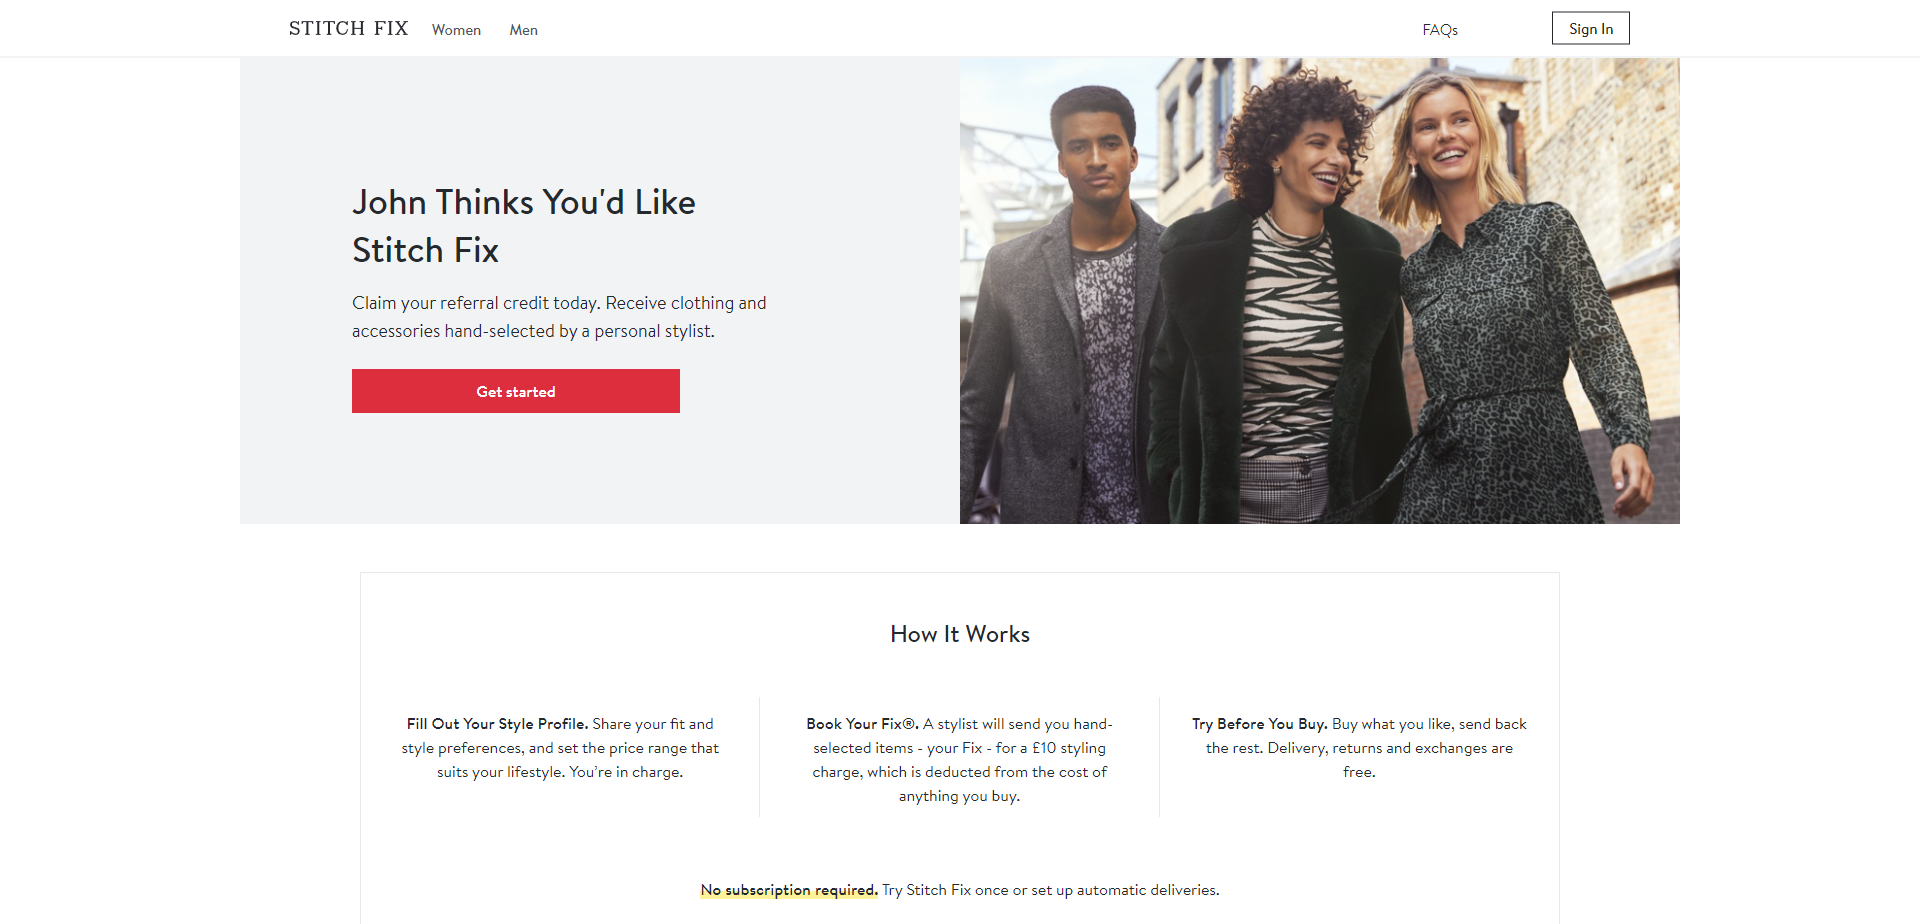 Landing Page for Stitch Fix